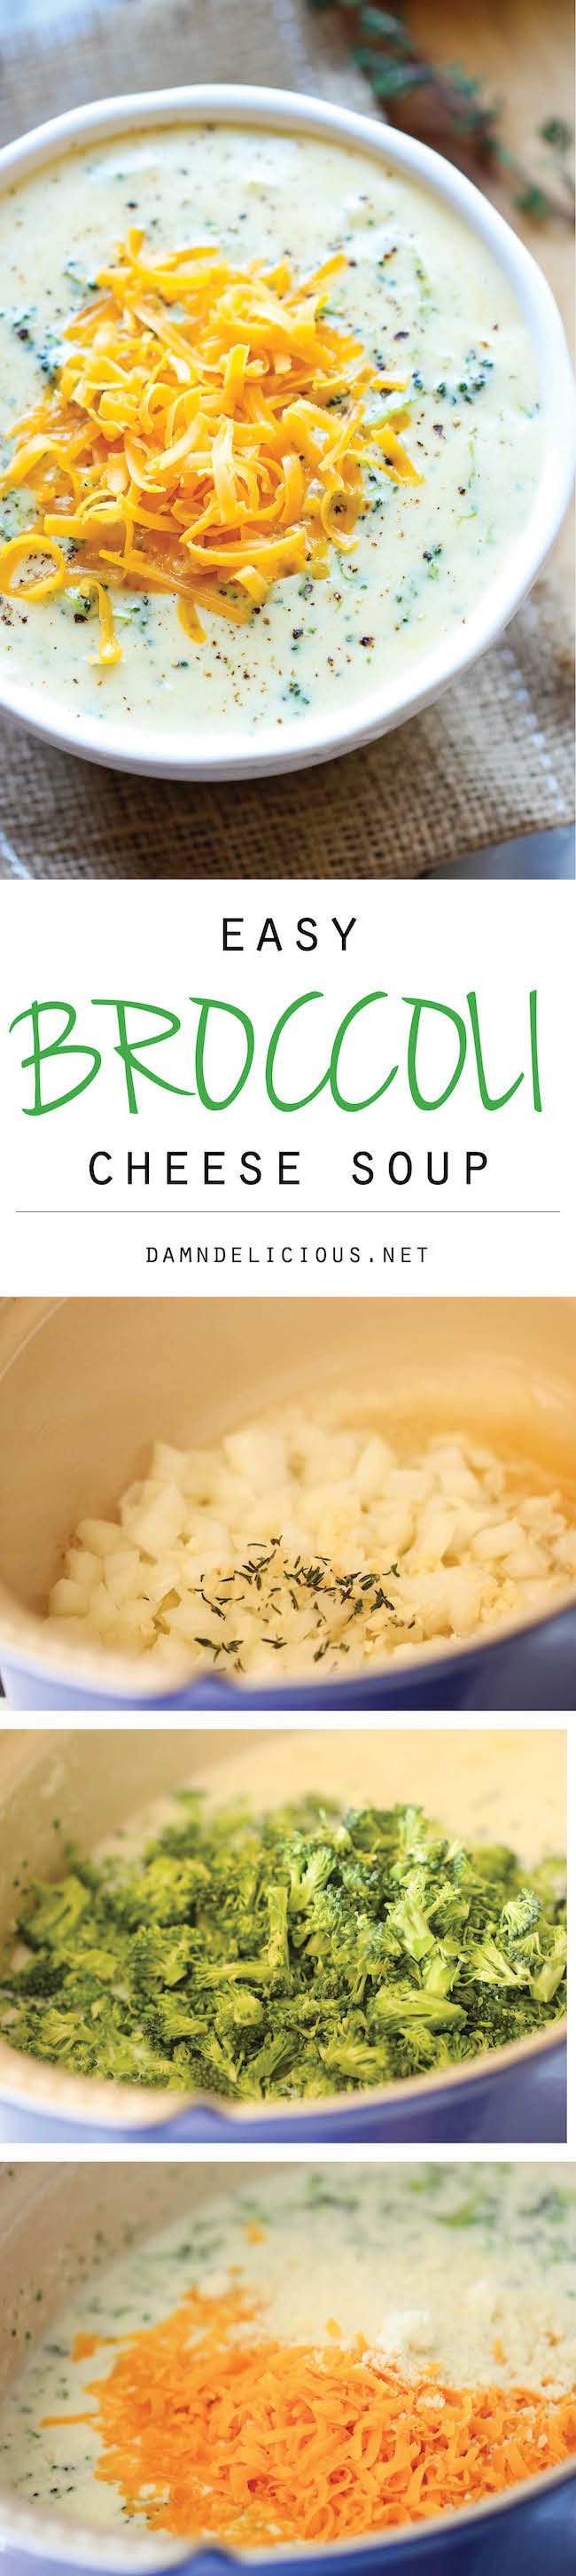 Broccoli Cheese Soup – So amazingly warm and cheesy, and you easily make this in less than 30 min. Perfect for those busy